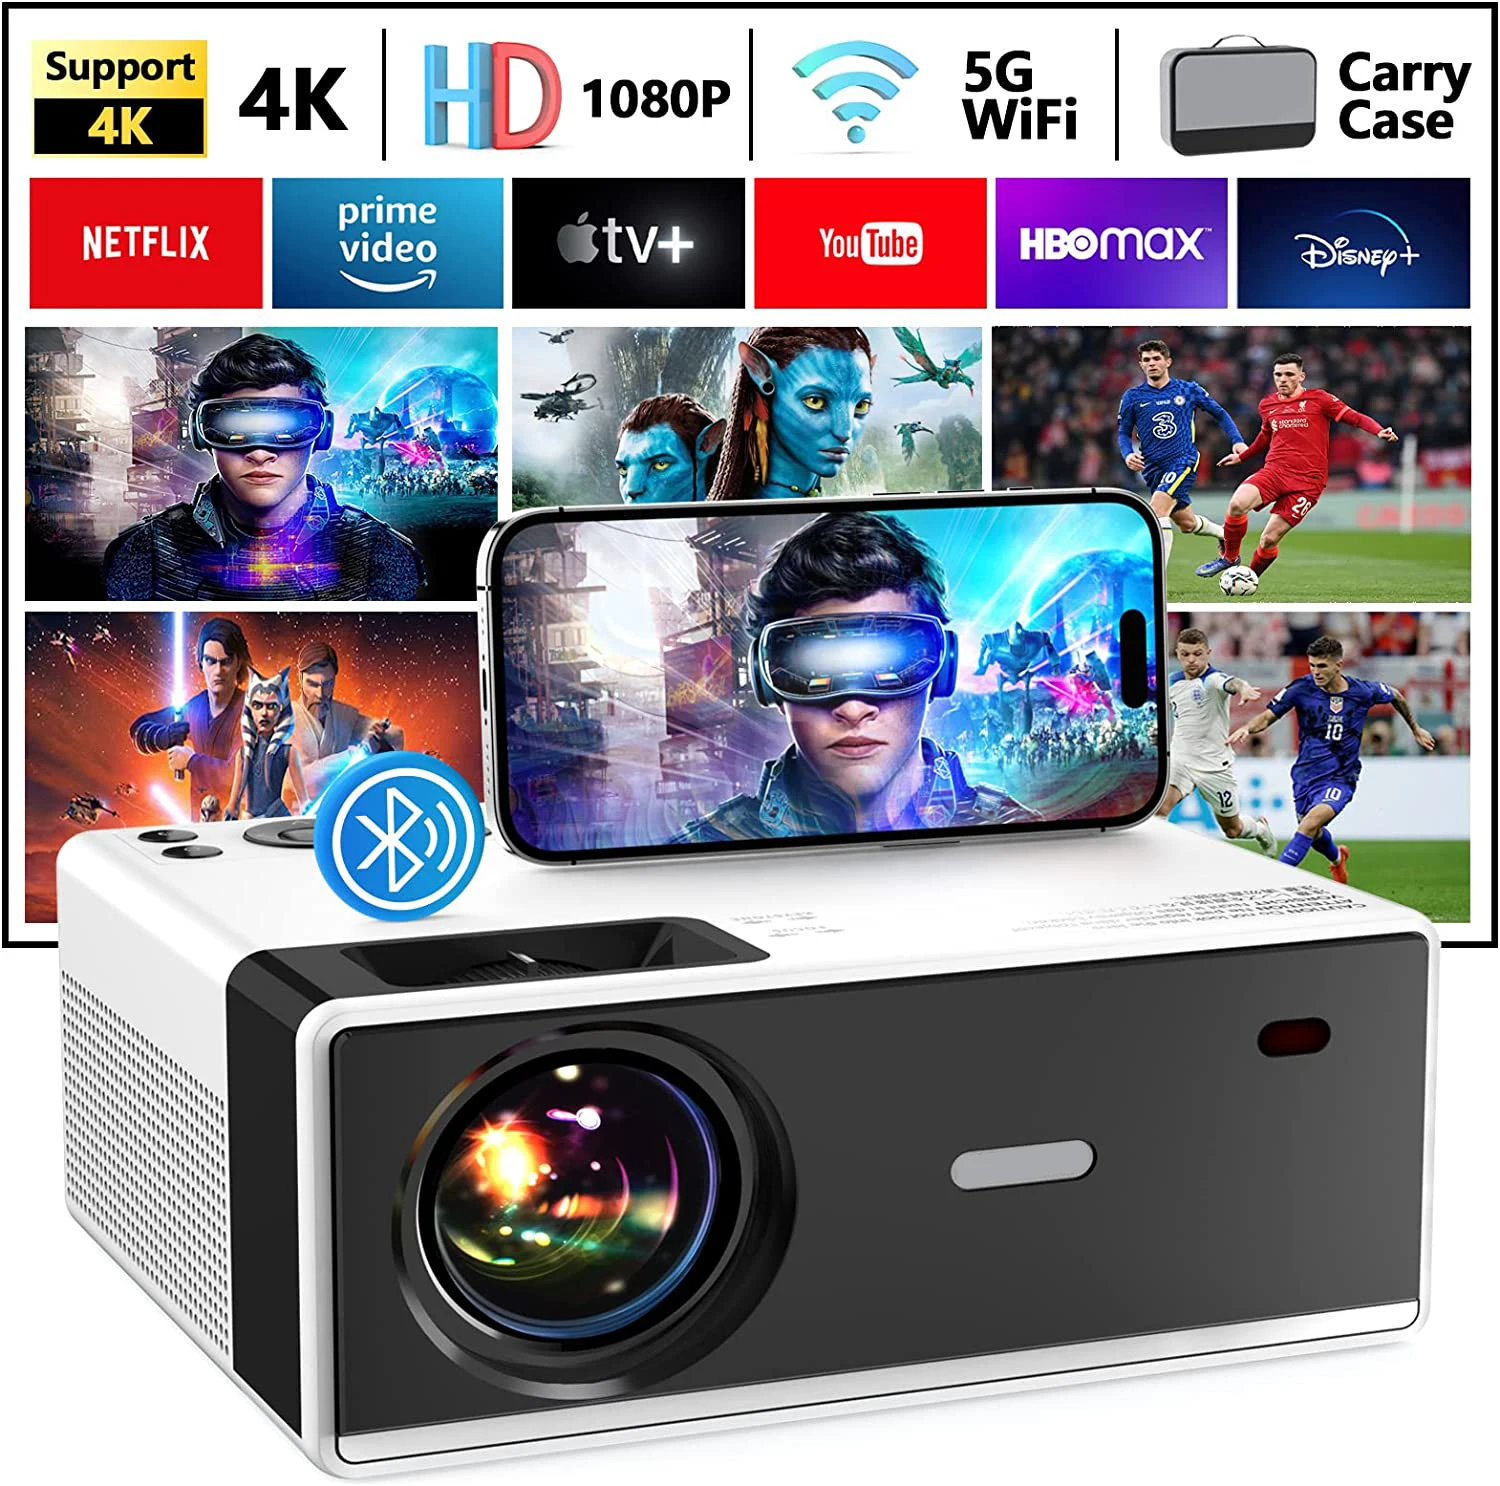 Projector Smart Tv 1080p Projector Native 10000 Lumens Led Home Cinema Beamer Projector For Android Phone Iphone